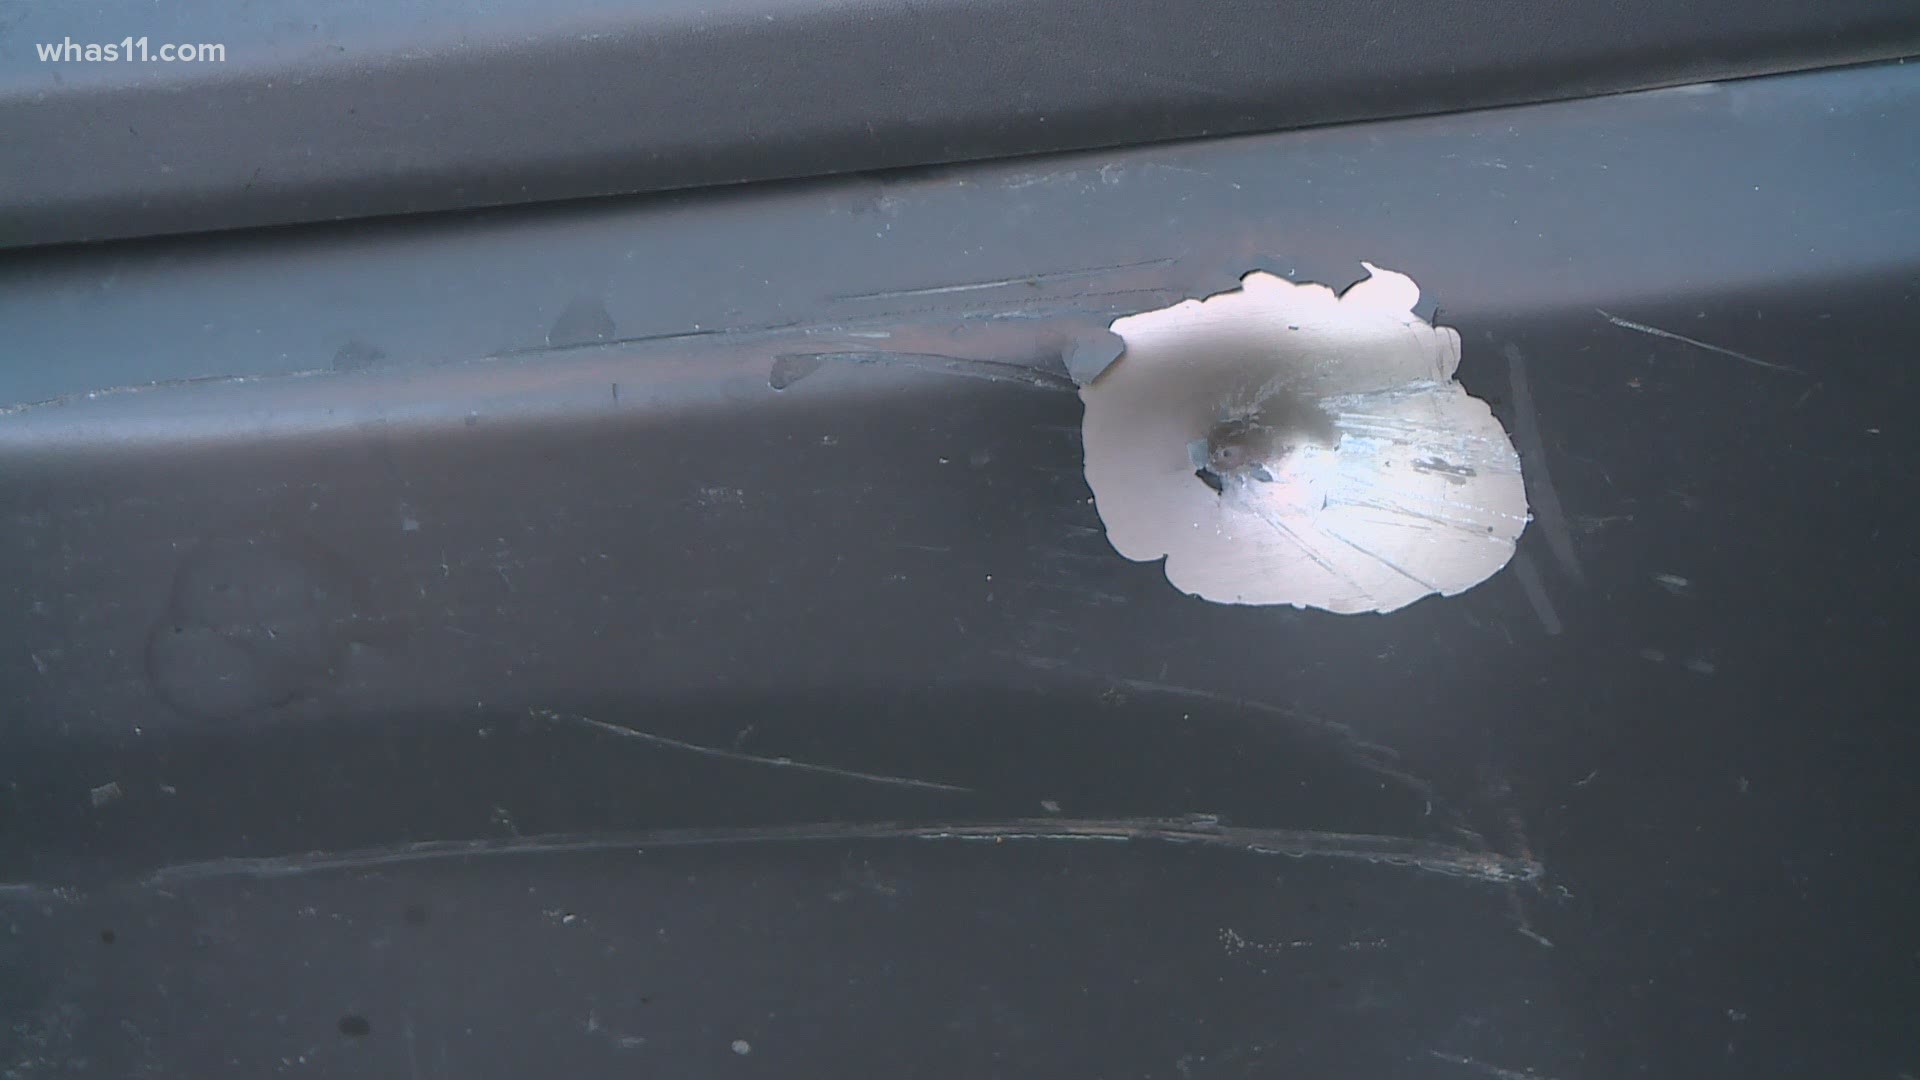 A home invasion which led to gunfire in Fairdale early Wednesday morning has many neighbors concerned.